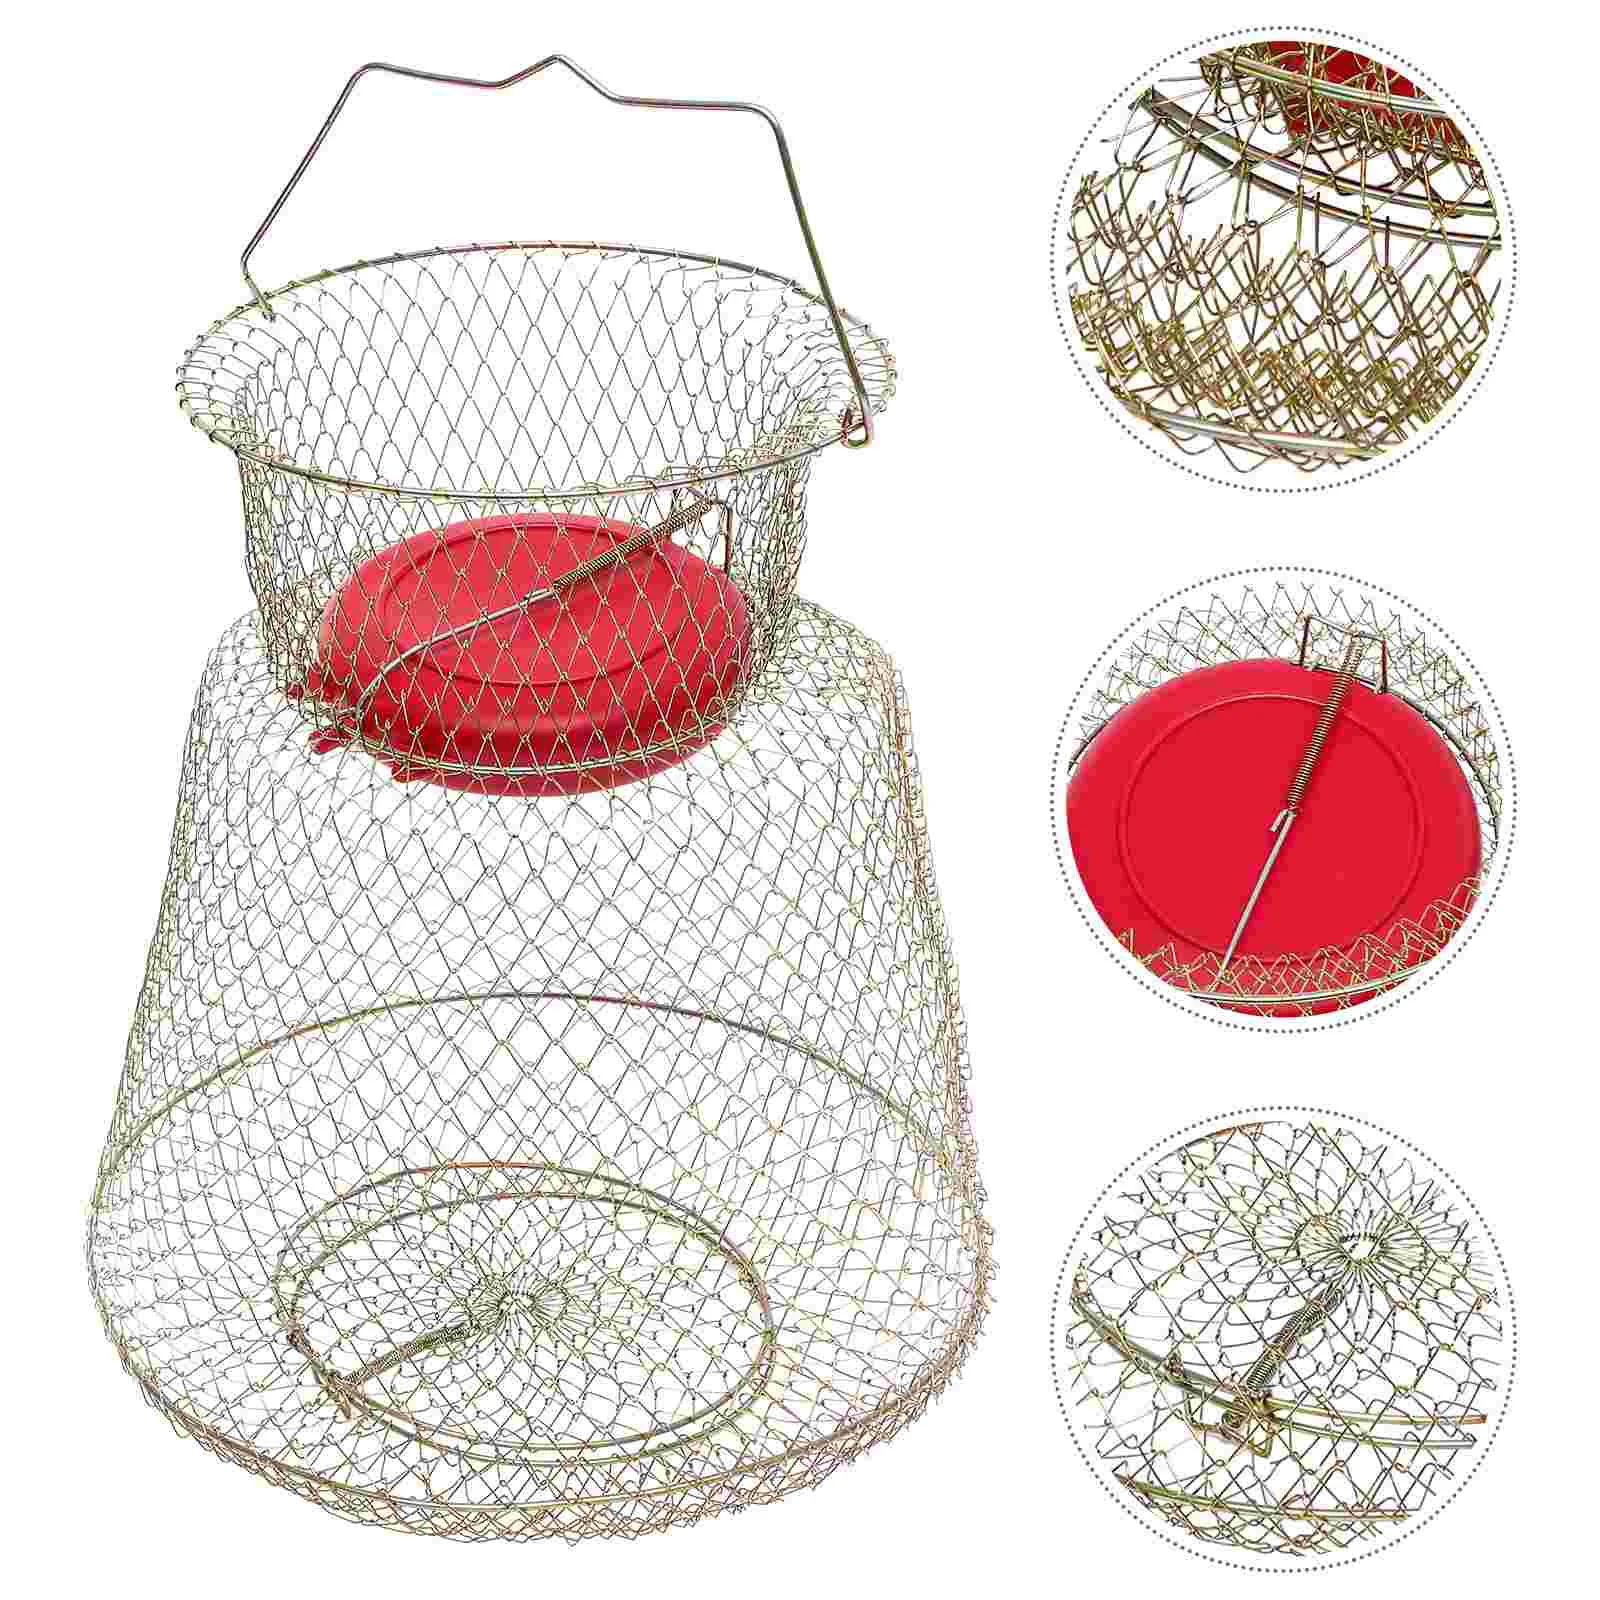 

Basket Cage Mesh Crab Wire Net Collapsible Craw Hold Rustproof Netting Foldable Portable Crawfish Stringer Minnow Fishes Folding